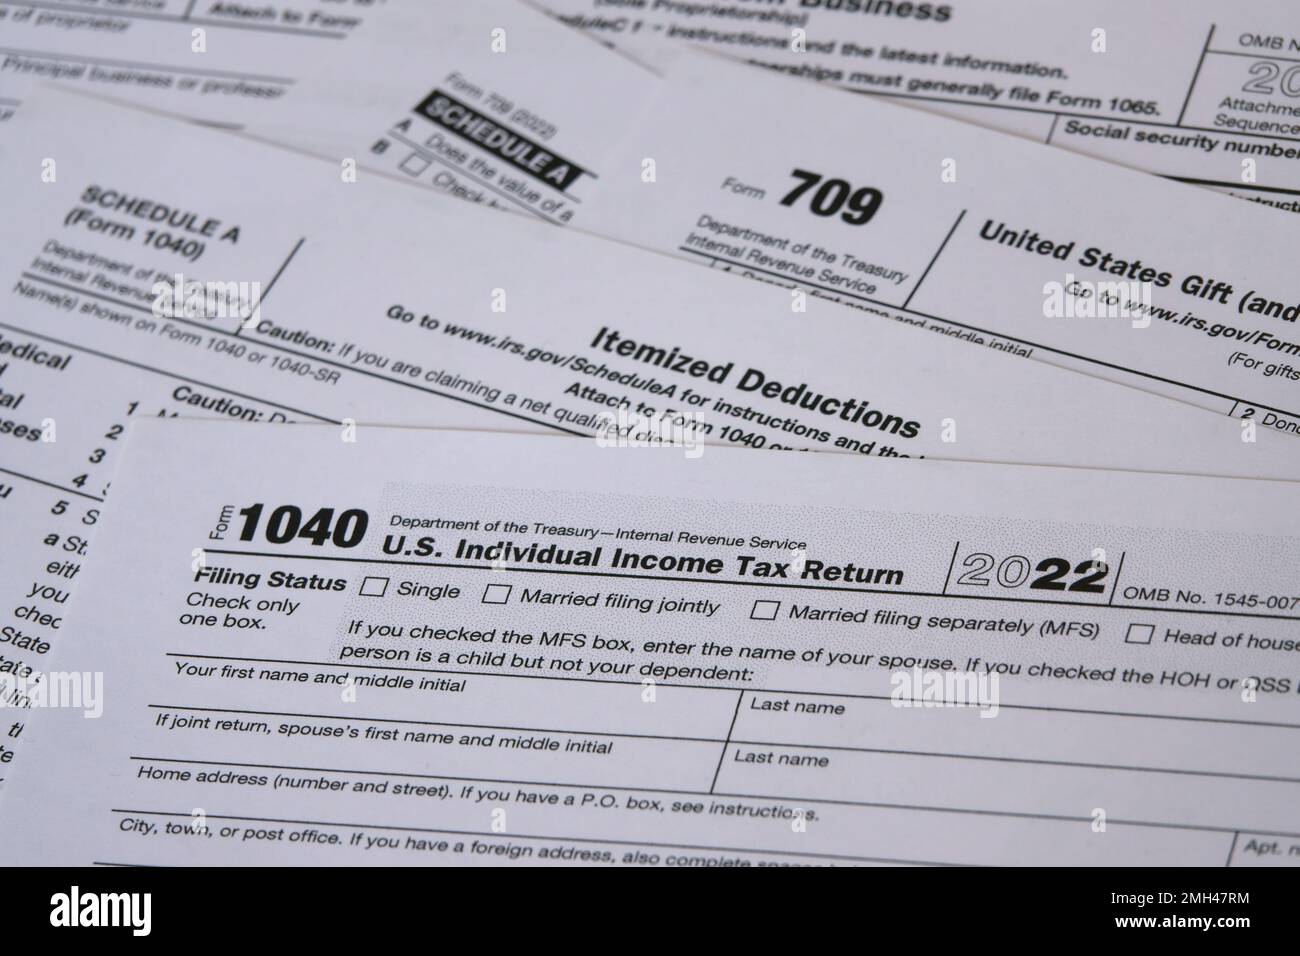 For tax year 2022, an IRS 1040 tax form is shown, along with Itemized Deductions (Schedule A) and Gift (form 709) worksheets for filing in 2023. Stock Photo